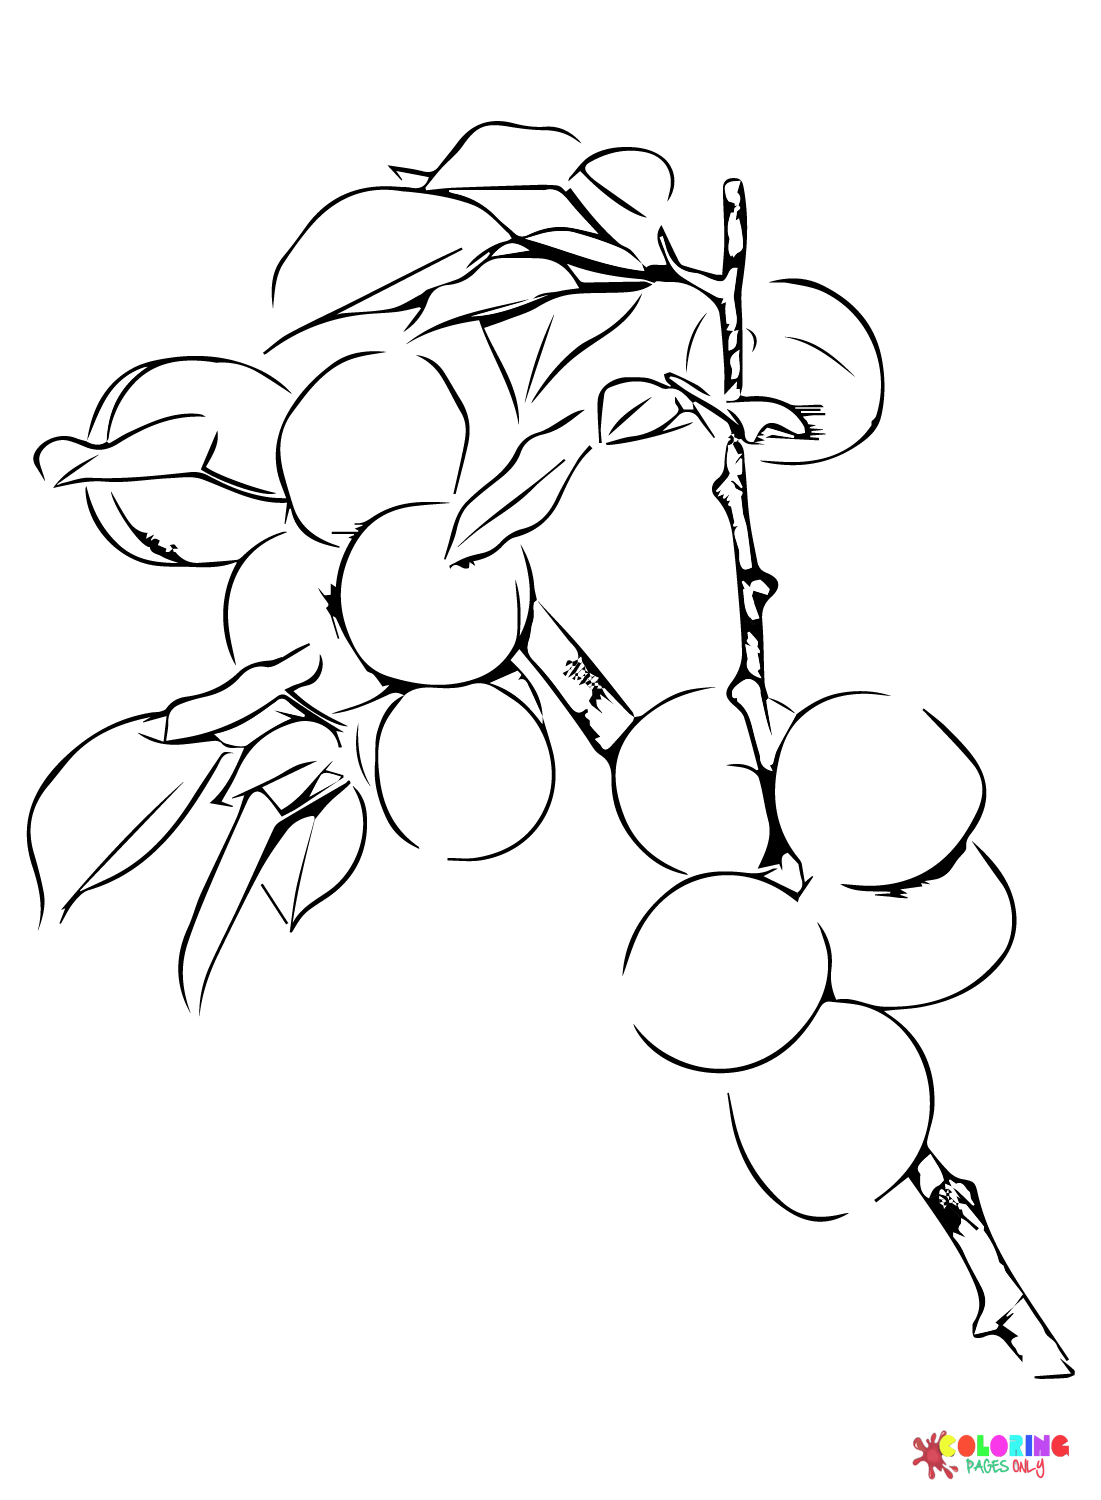 Print Apricot Coloring Page